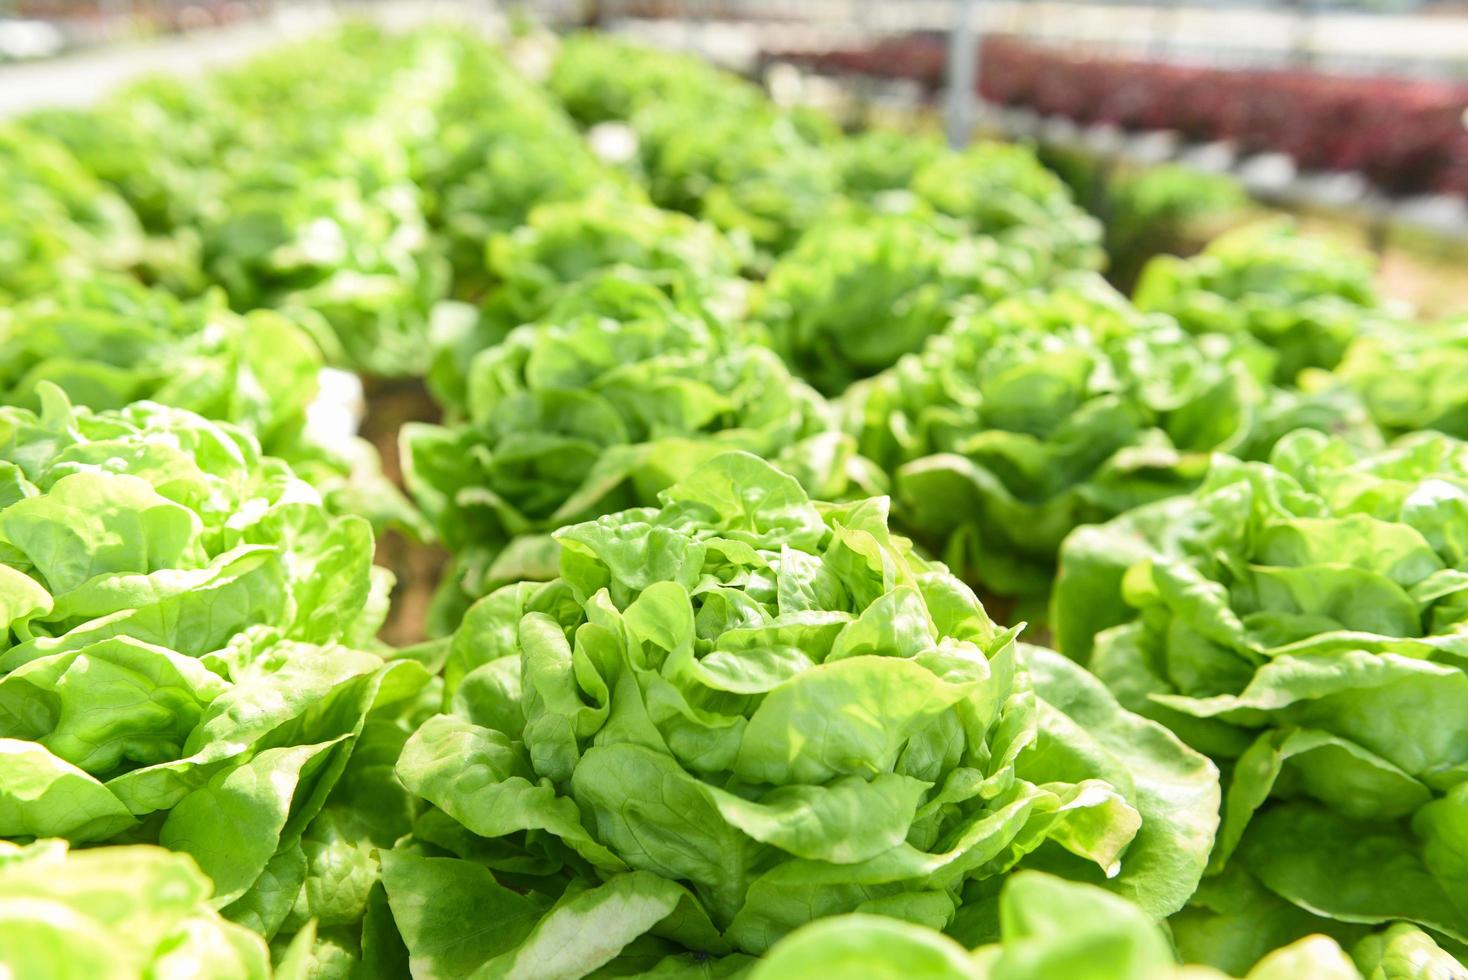 Butterhead Lettuce Hydroponic farm salad plants on water without soil agriculture in the greenhouse organic vegetable hydroponic system young green lettuce salad growing in the garden photo